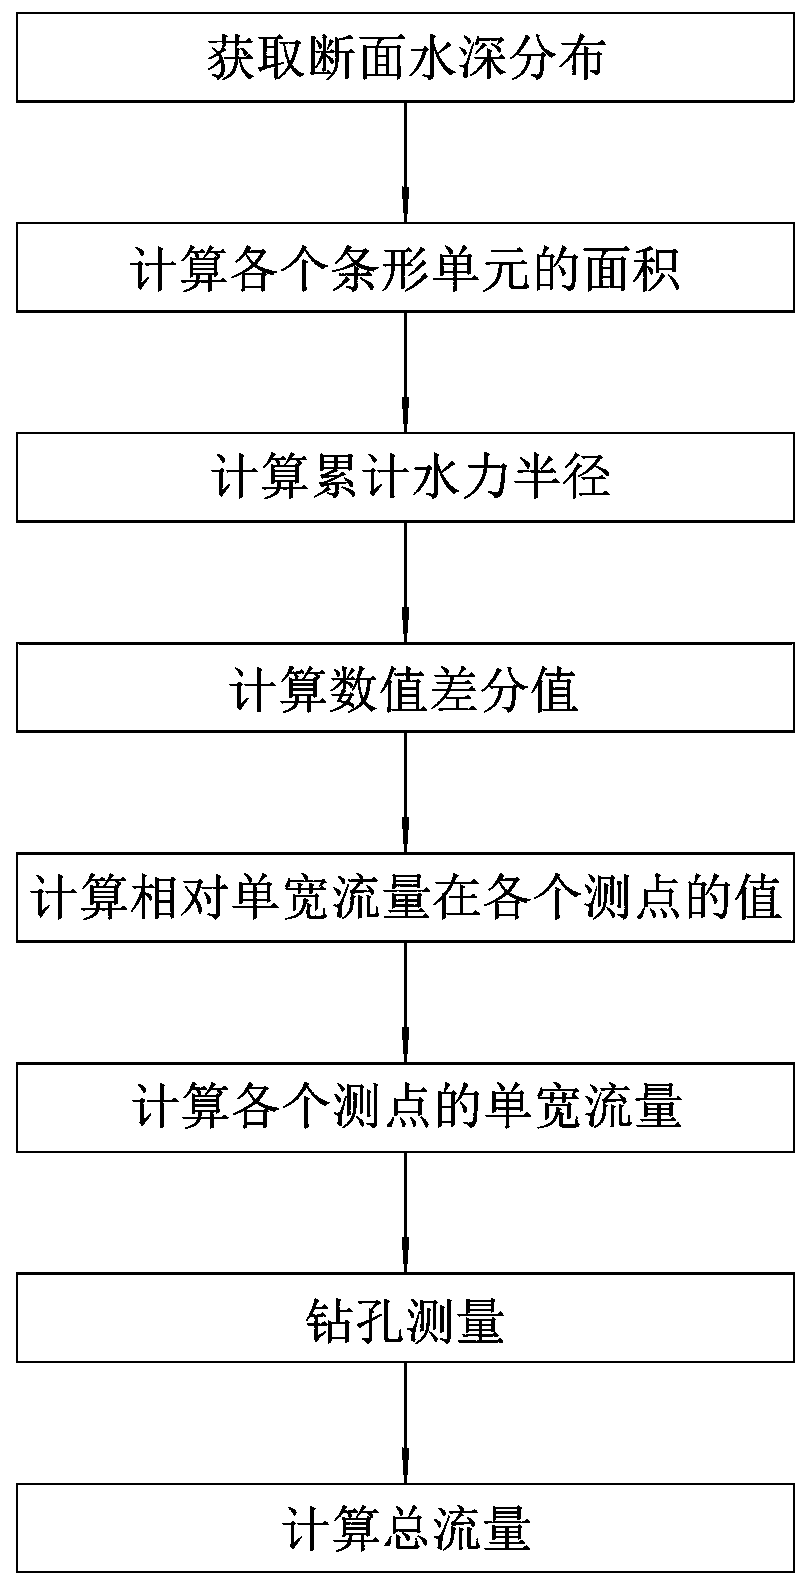 Flow element measuring method for flow in river freezing period